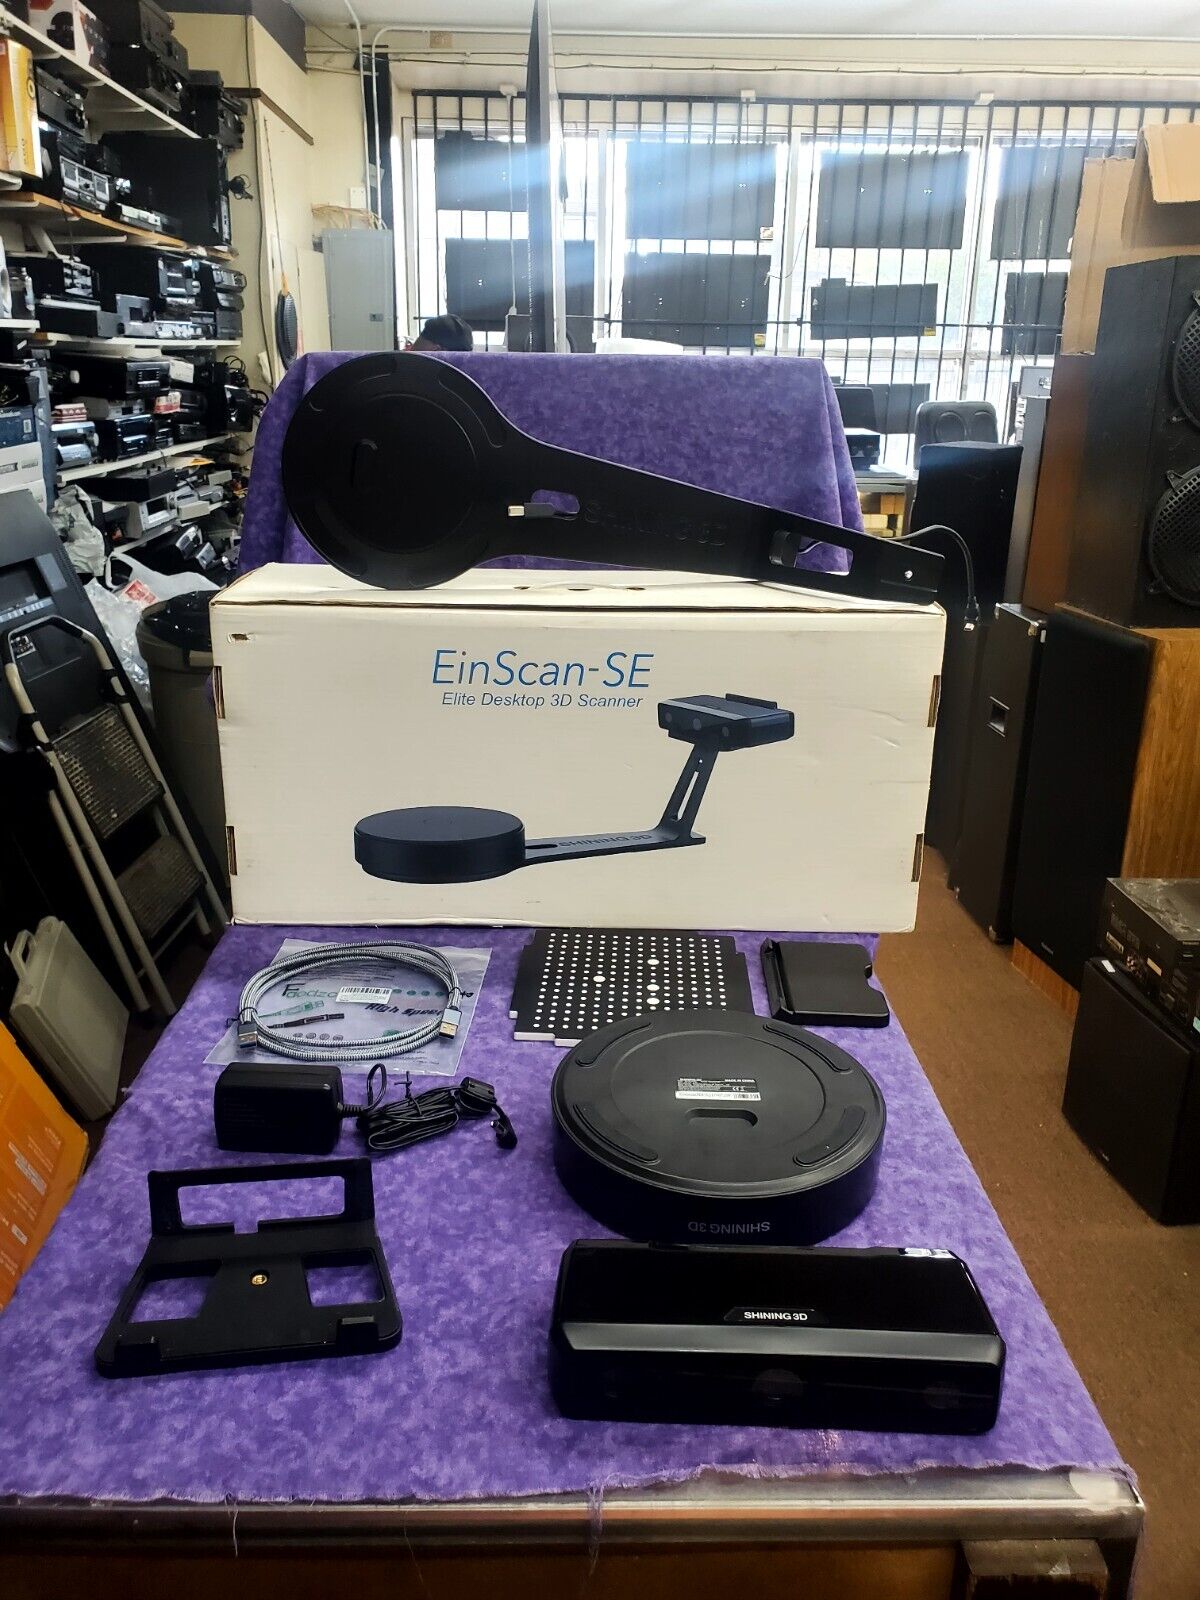 💥VERY GOOD CONDITION💥SHINING EINSCAN-SE 3D SCANNER w/ ACCESSORIES💥TESTED💥